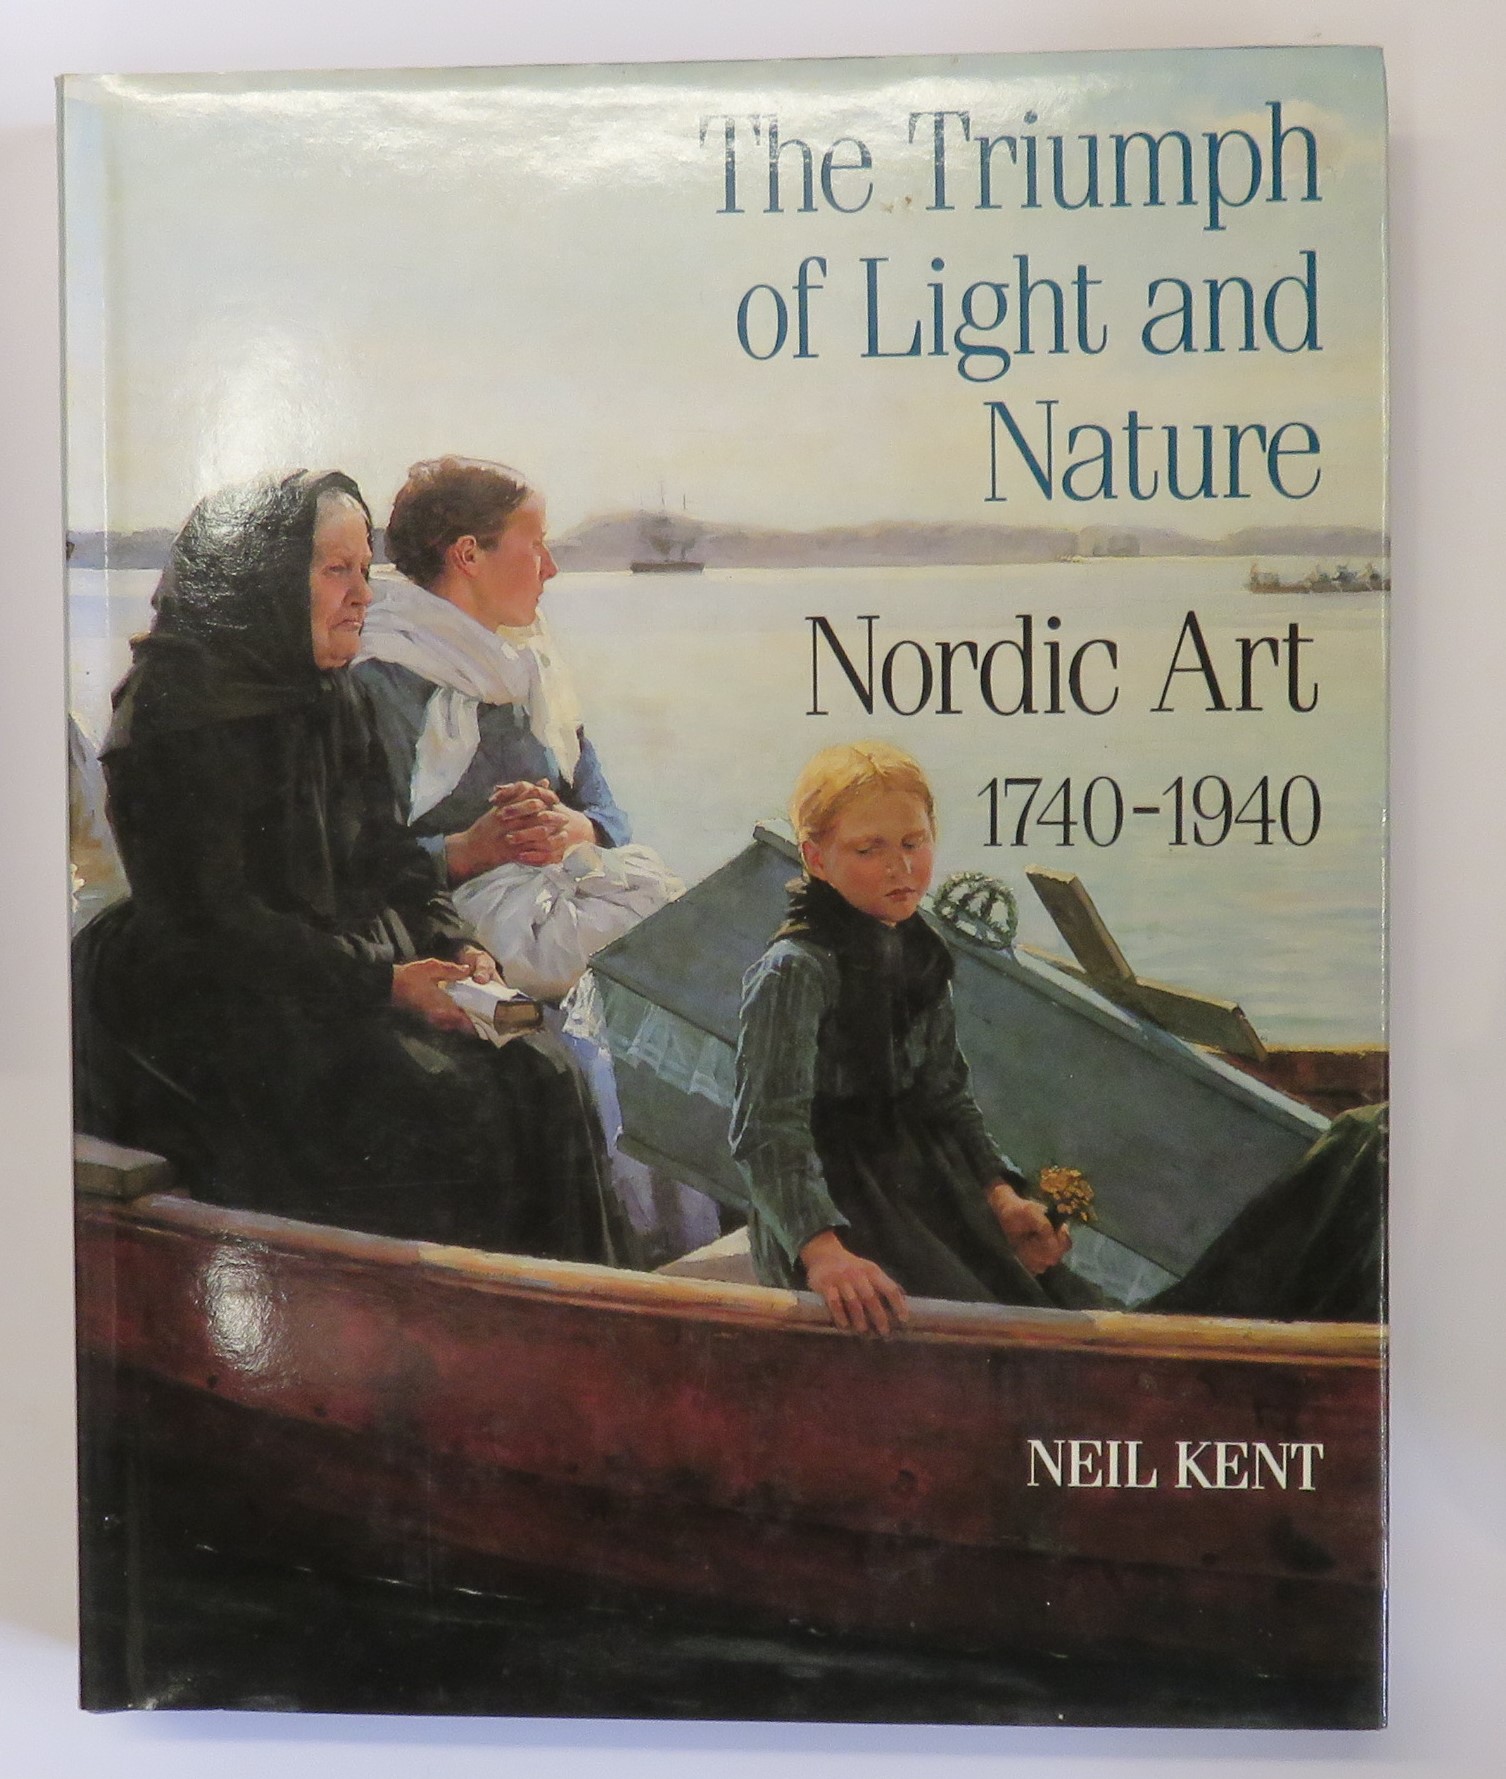 The Triumph of Light and Nature Nordic Art 1740-1940